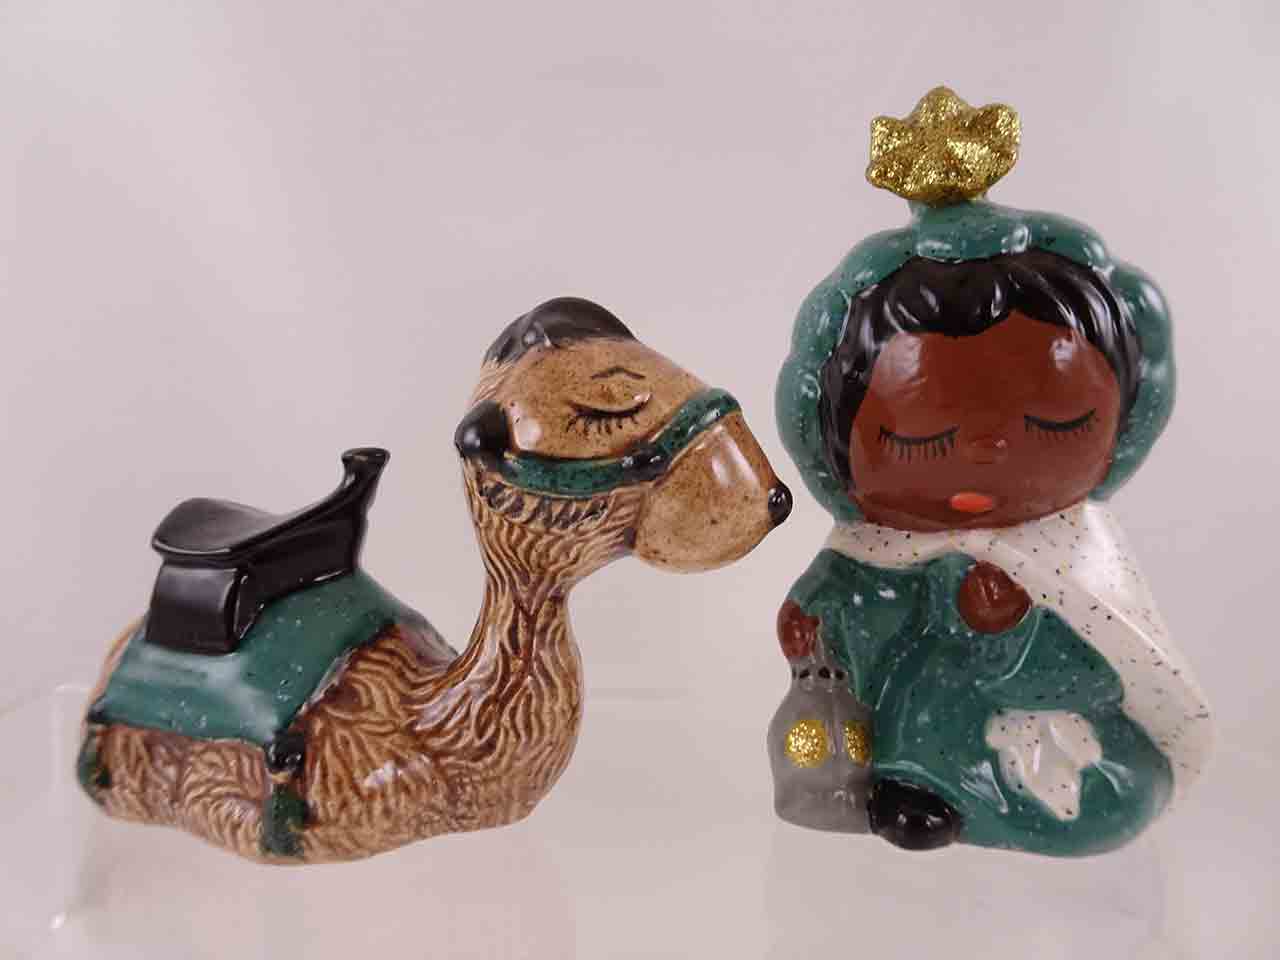 Jean Grief nativity scene series of salt and pepper shakers - wise man & camel